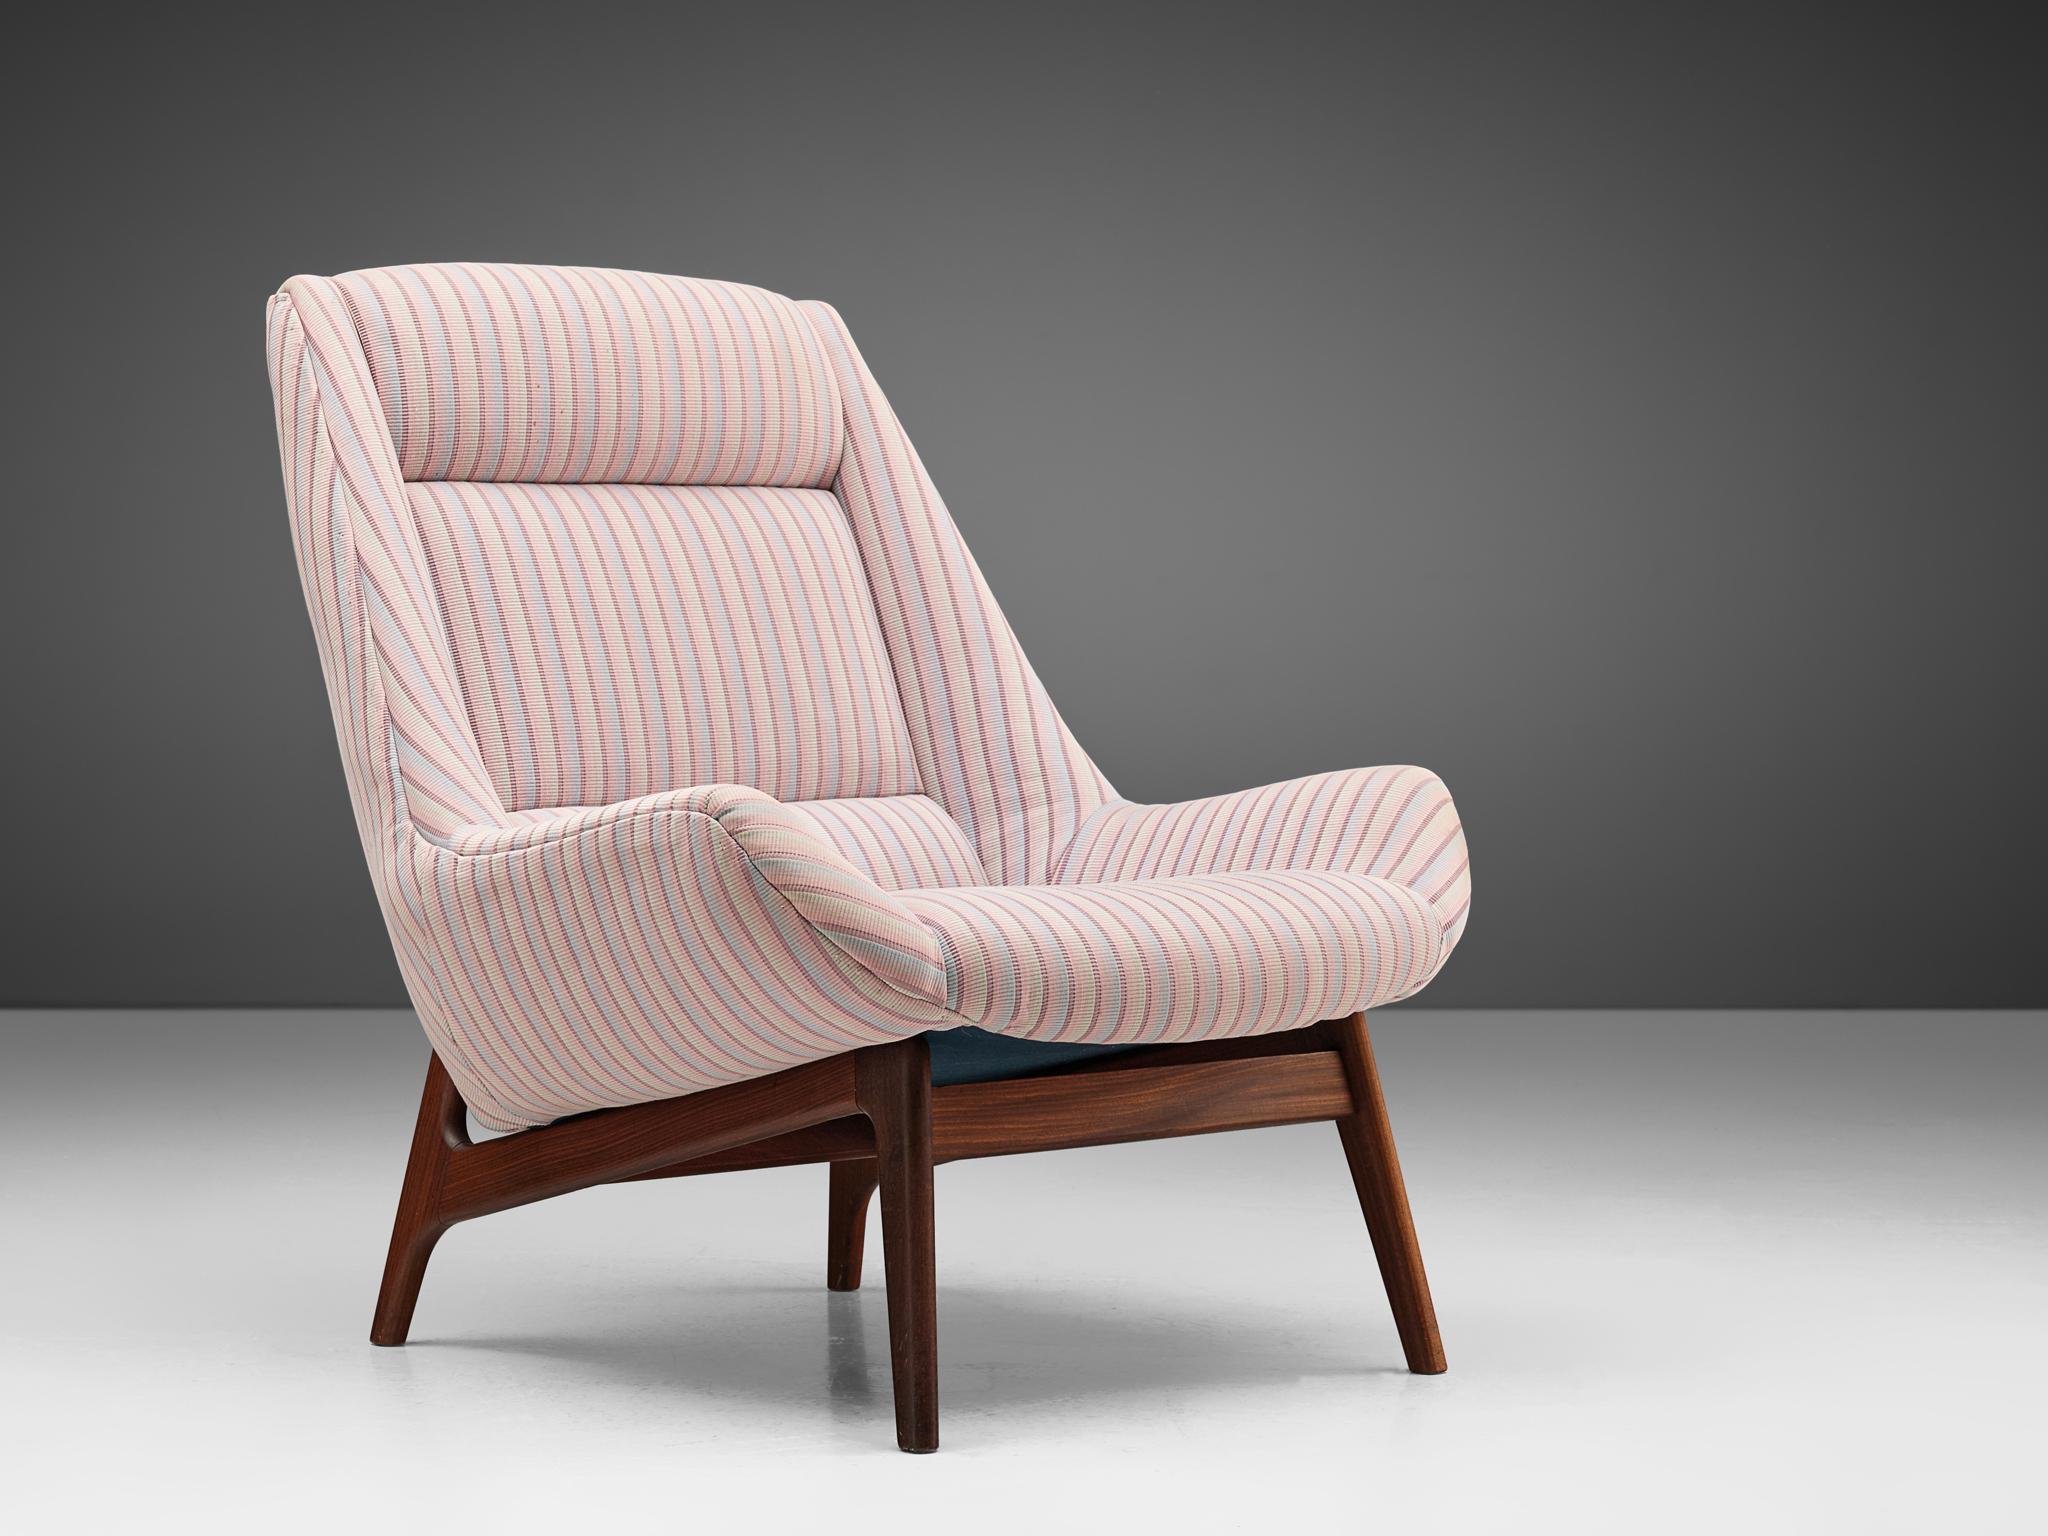 Danish furniture design, easy chair with teak frame, upholstered with patterned fabric, 1960s.

